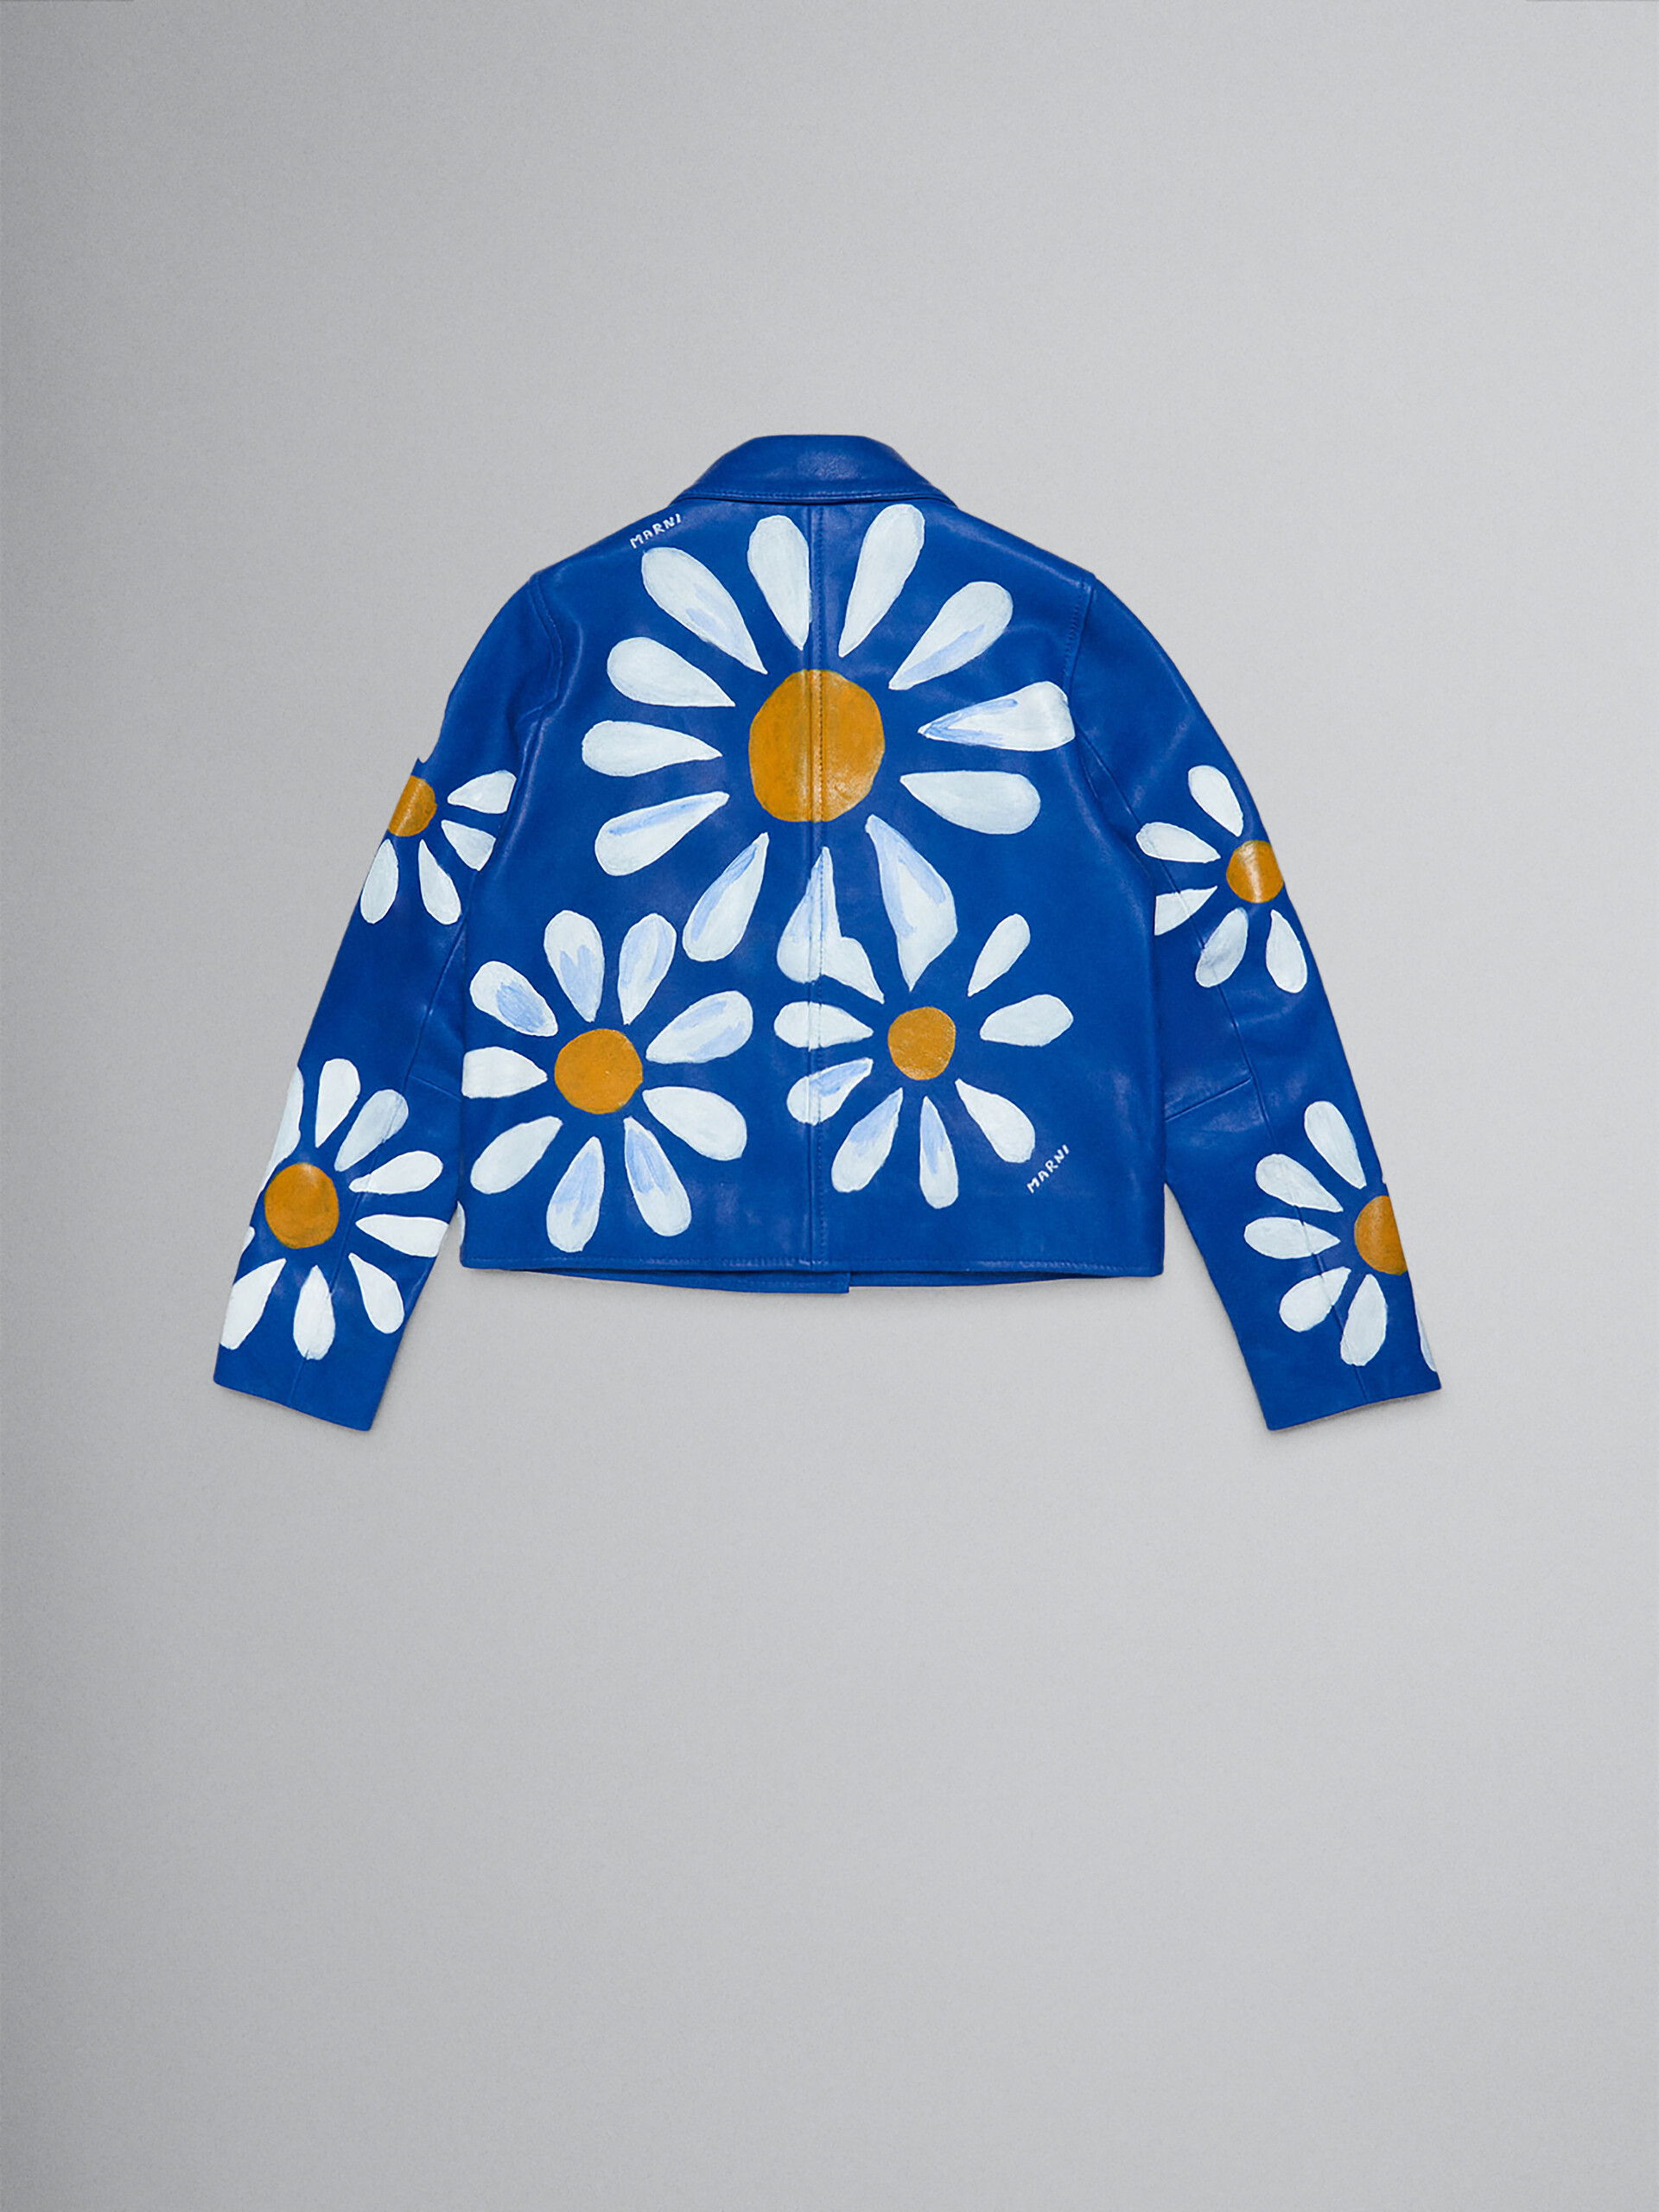 Blue genuine leather jacket with hand-painted Daisy pattern - Jackets - Image 2